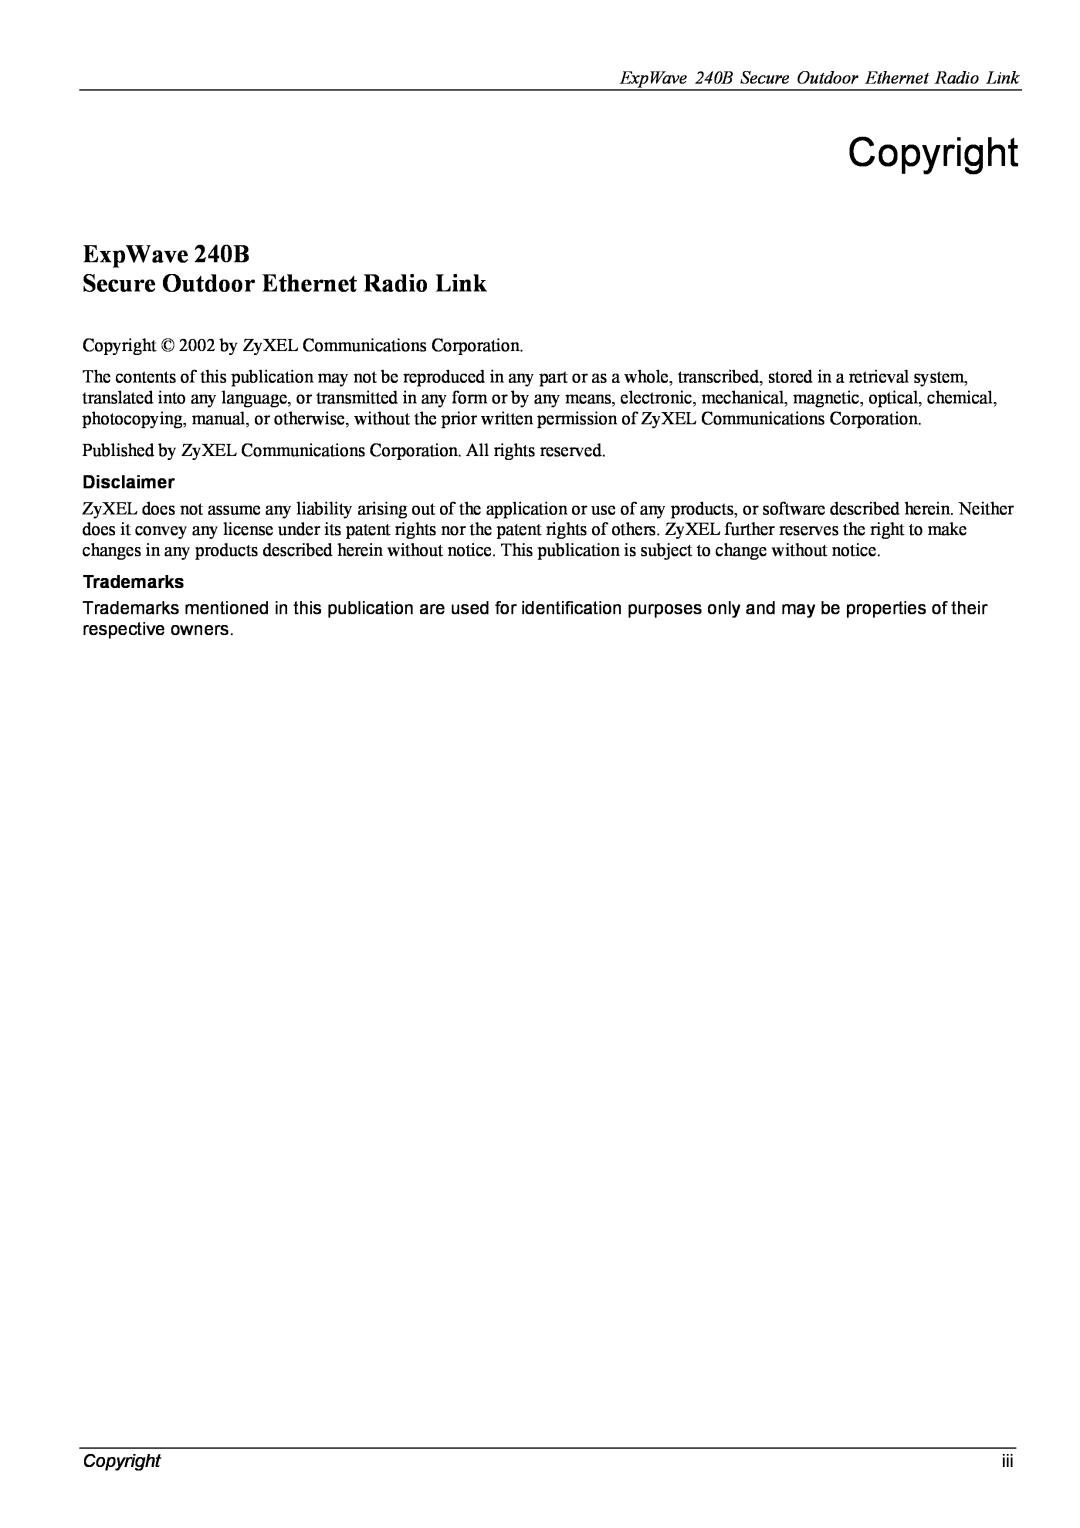 ZyXEL Communications manual Copyright, ExpWave 240B Secure Outdoor Ethernet Radio Link, Disclaimer, Trademarks 